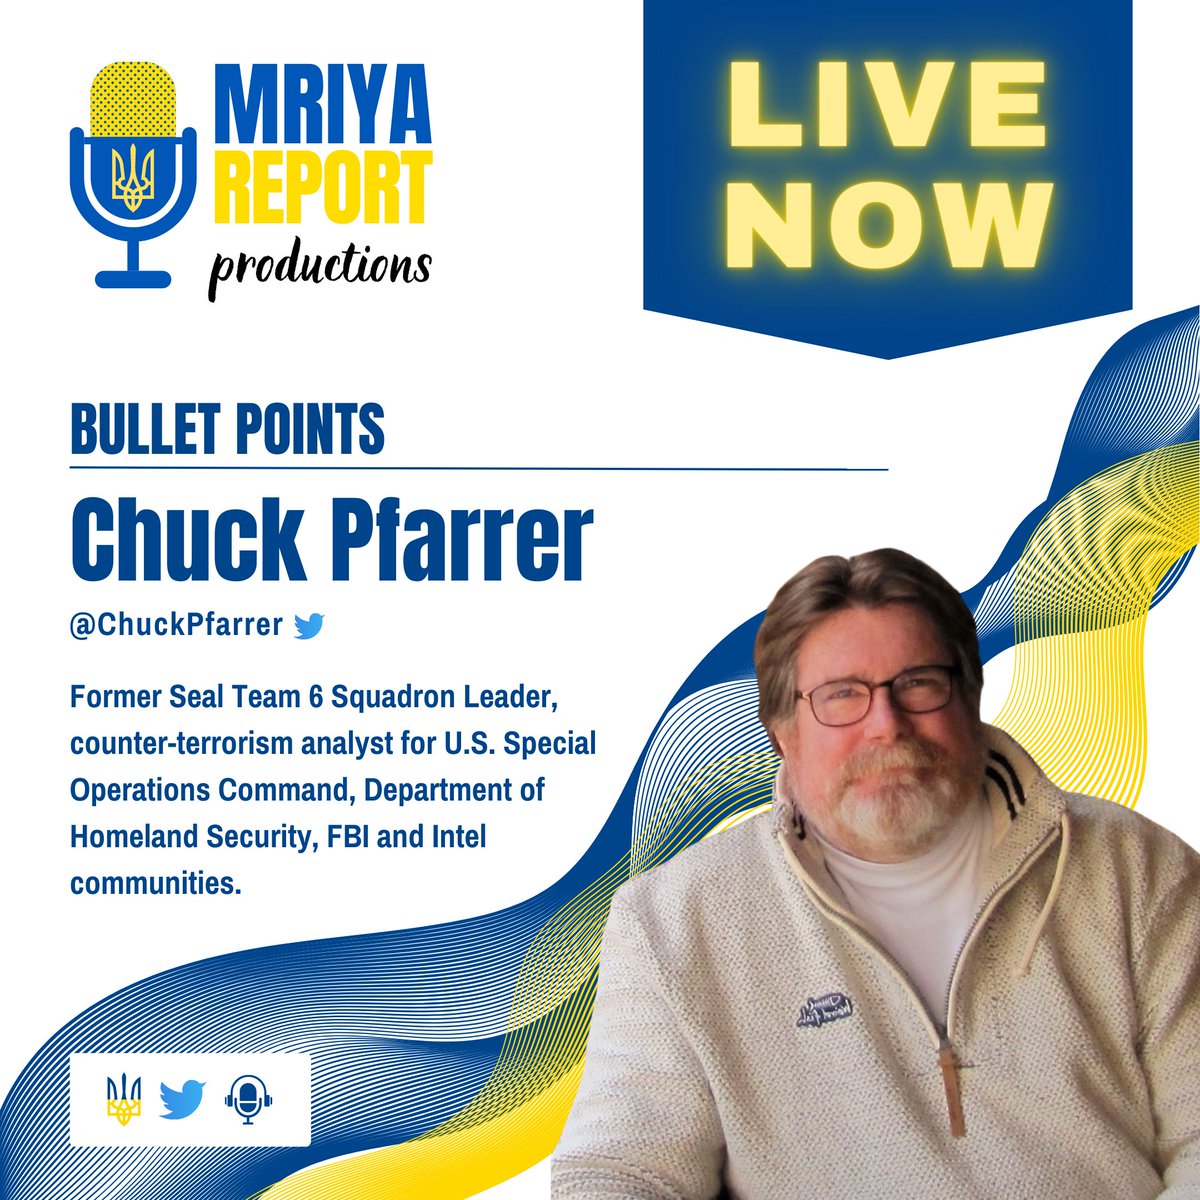 💥 LIVE NOW! Bullet Points!!💥
@ChuckPfarrer is with us #LIVE on the @MriyaReport🎙️talking about military updates and reporting on events happening in #Ukraine right now! 

Come join us now for information and questions! 🇺🇦

#Ukraine #UkraineWarNews #CounterOffensive @AlGGDirect